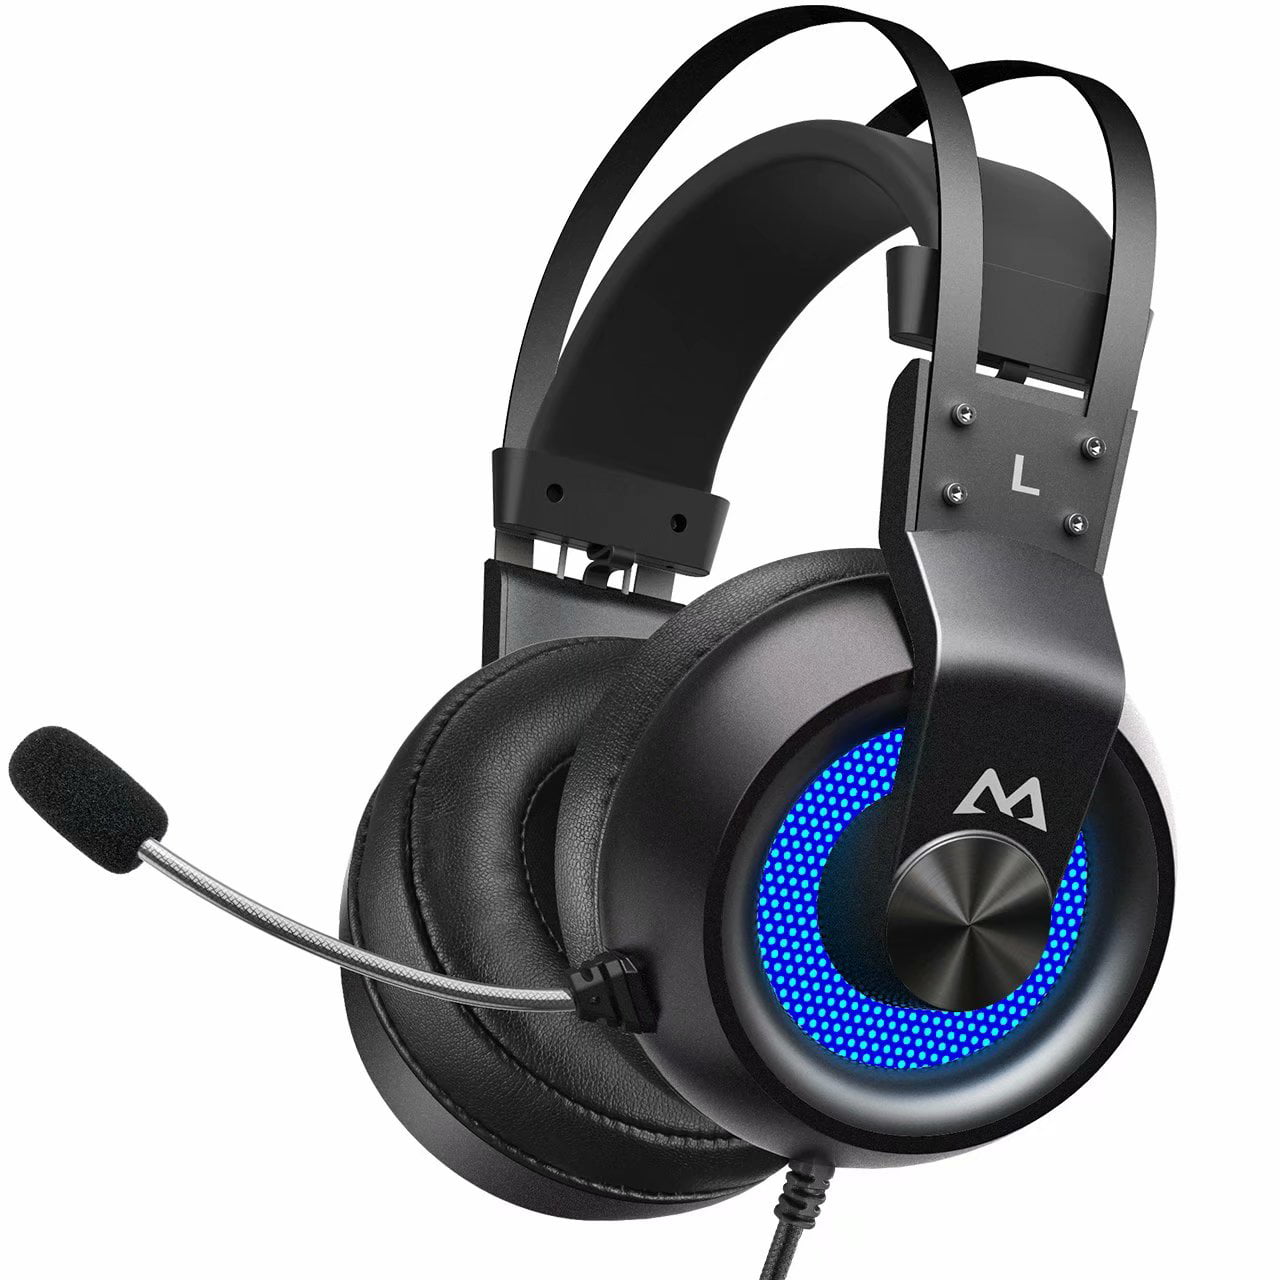 ps4 chat audio only one ear